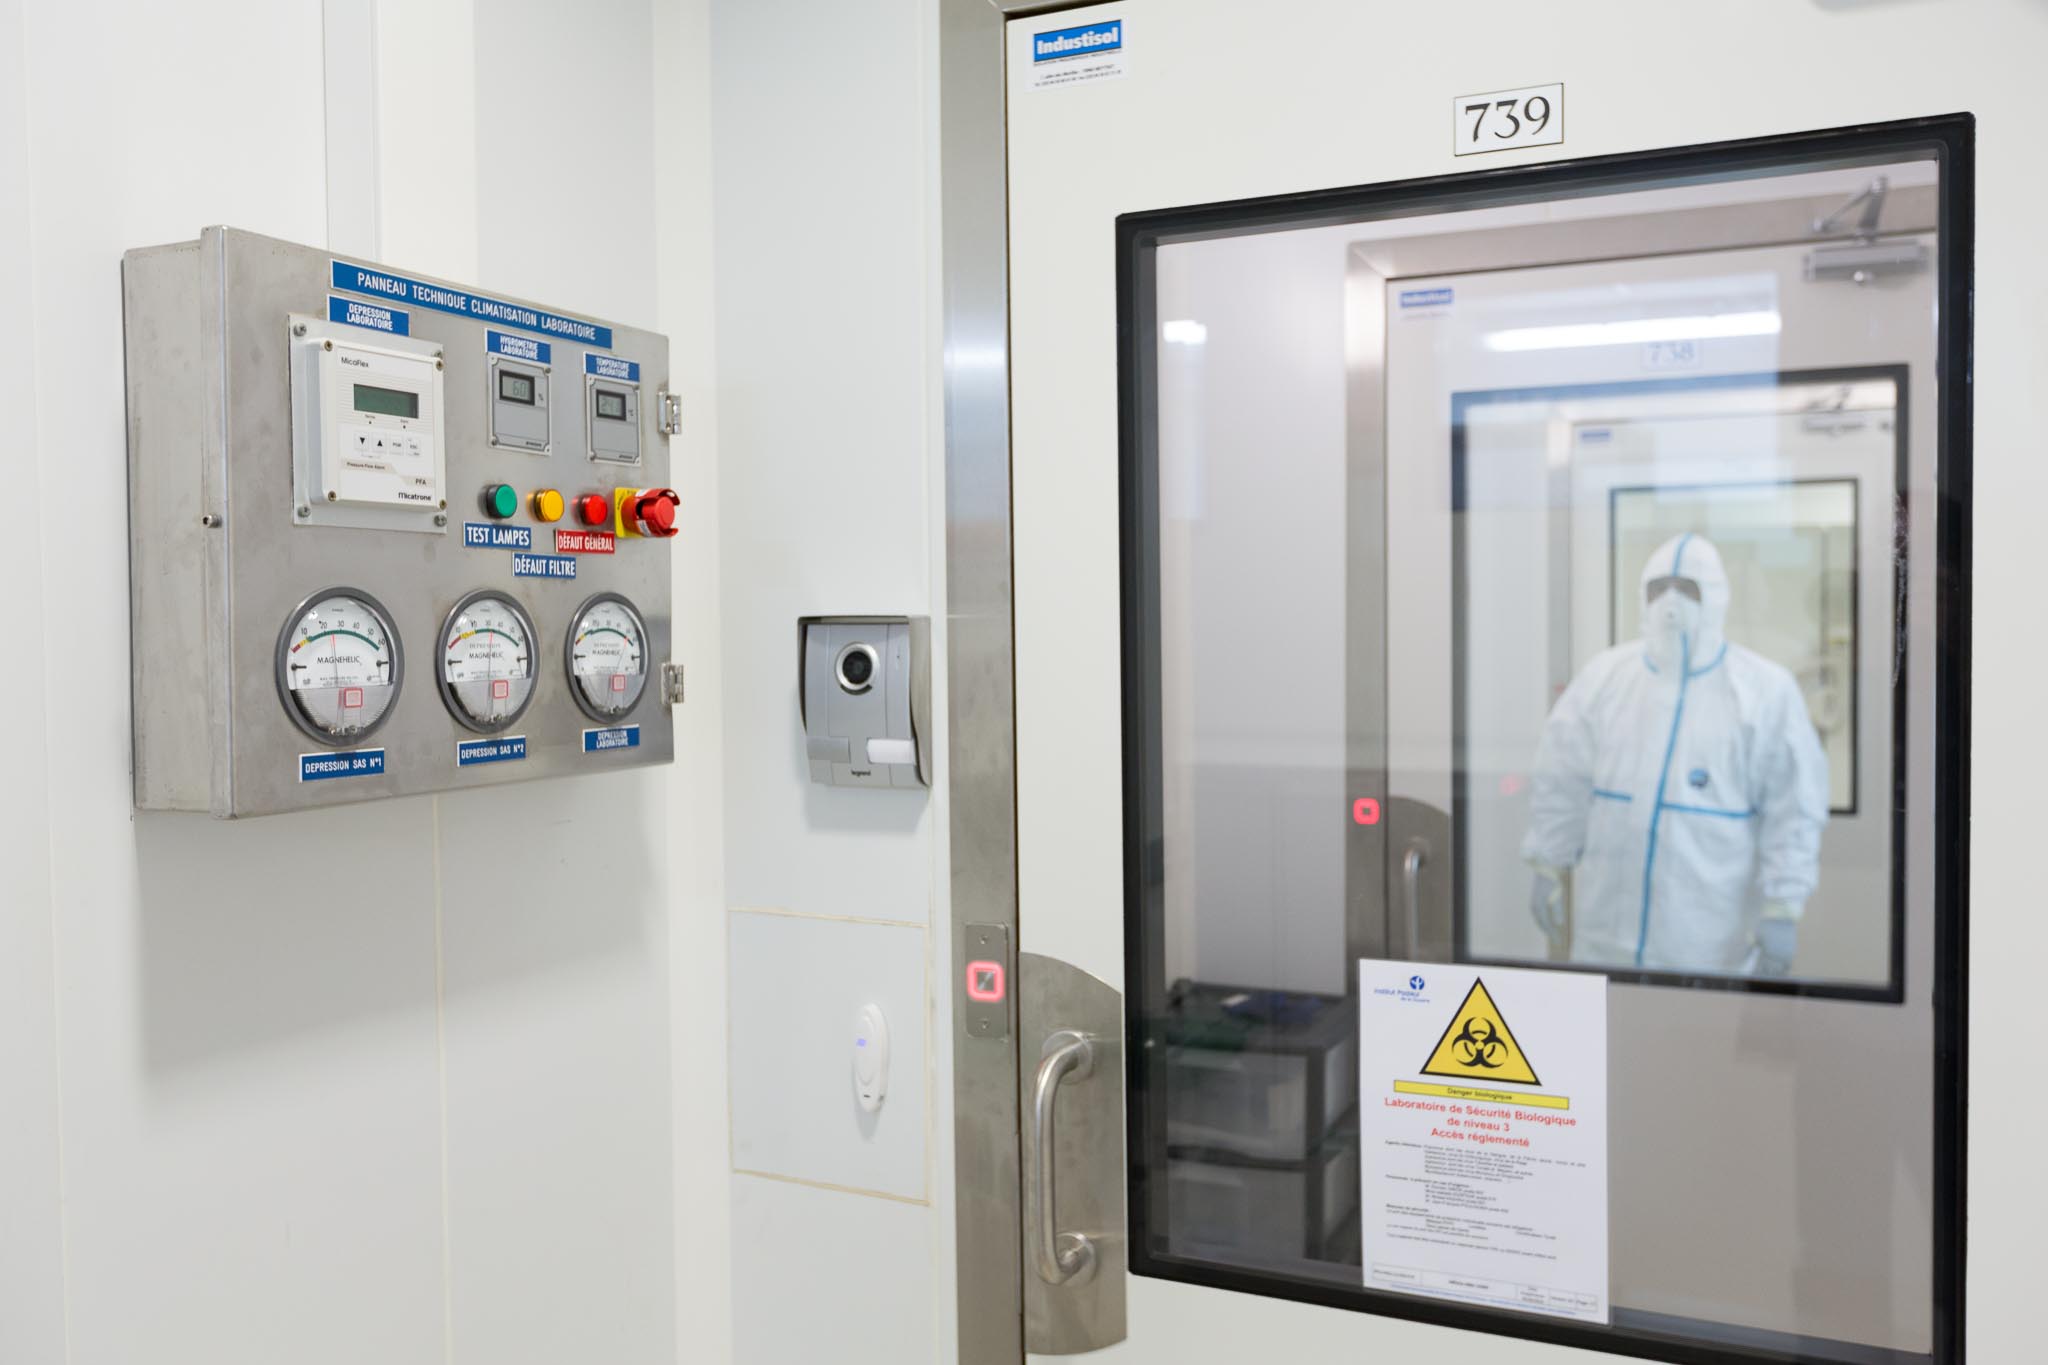 The newly-established Vectopole contains a biosafety level 3 laboratory, which provides a safe way of handling viruses that may cause severe illness or death. Image: Institut Pasteur de la Guyane